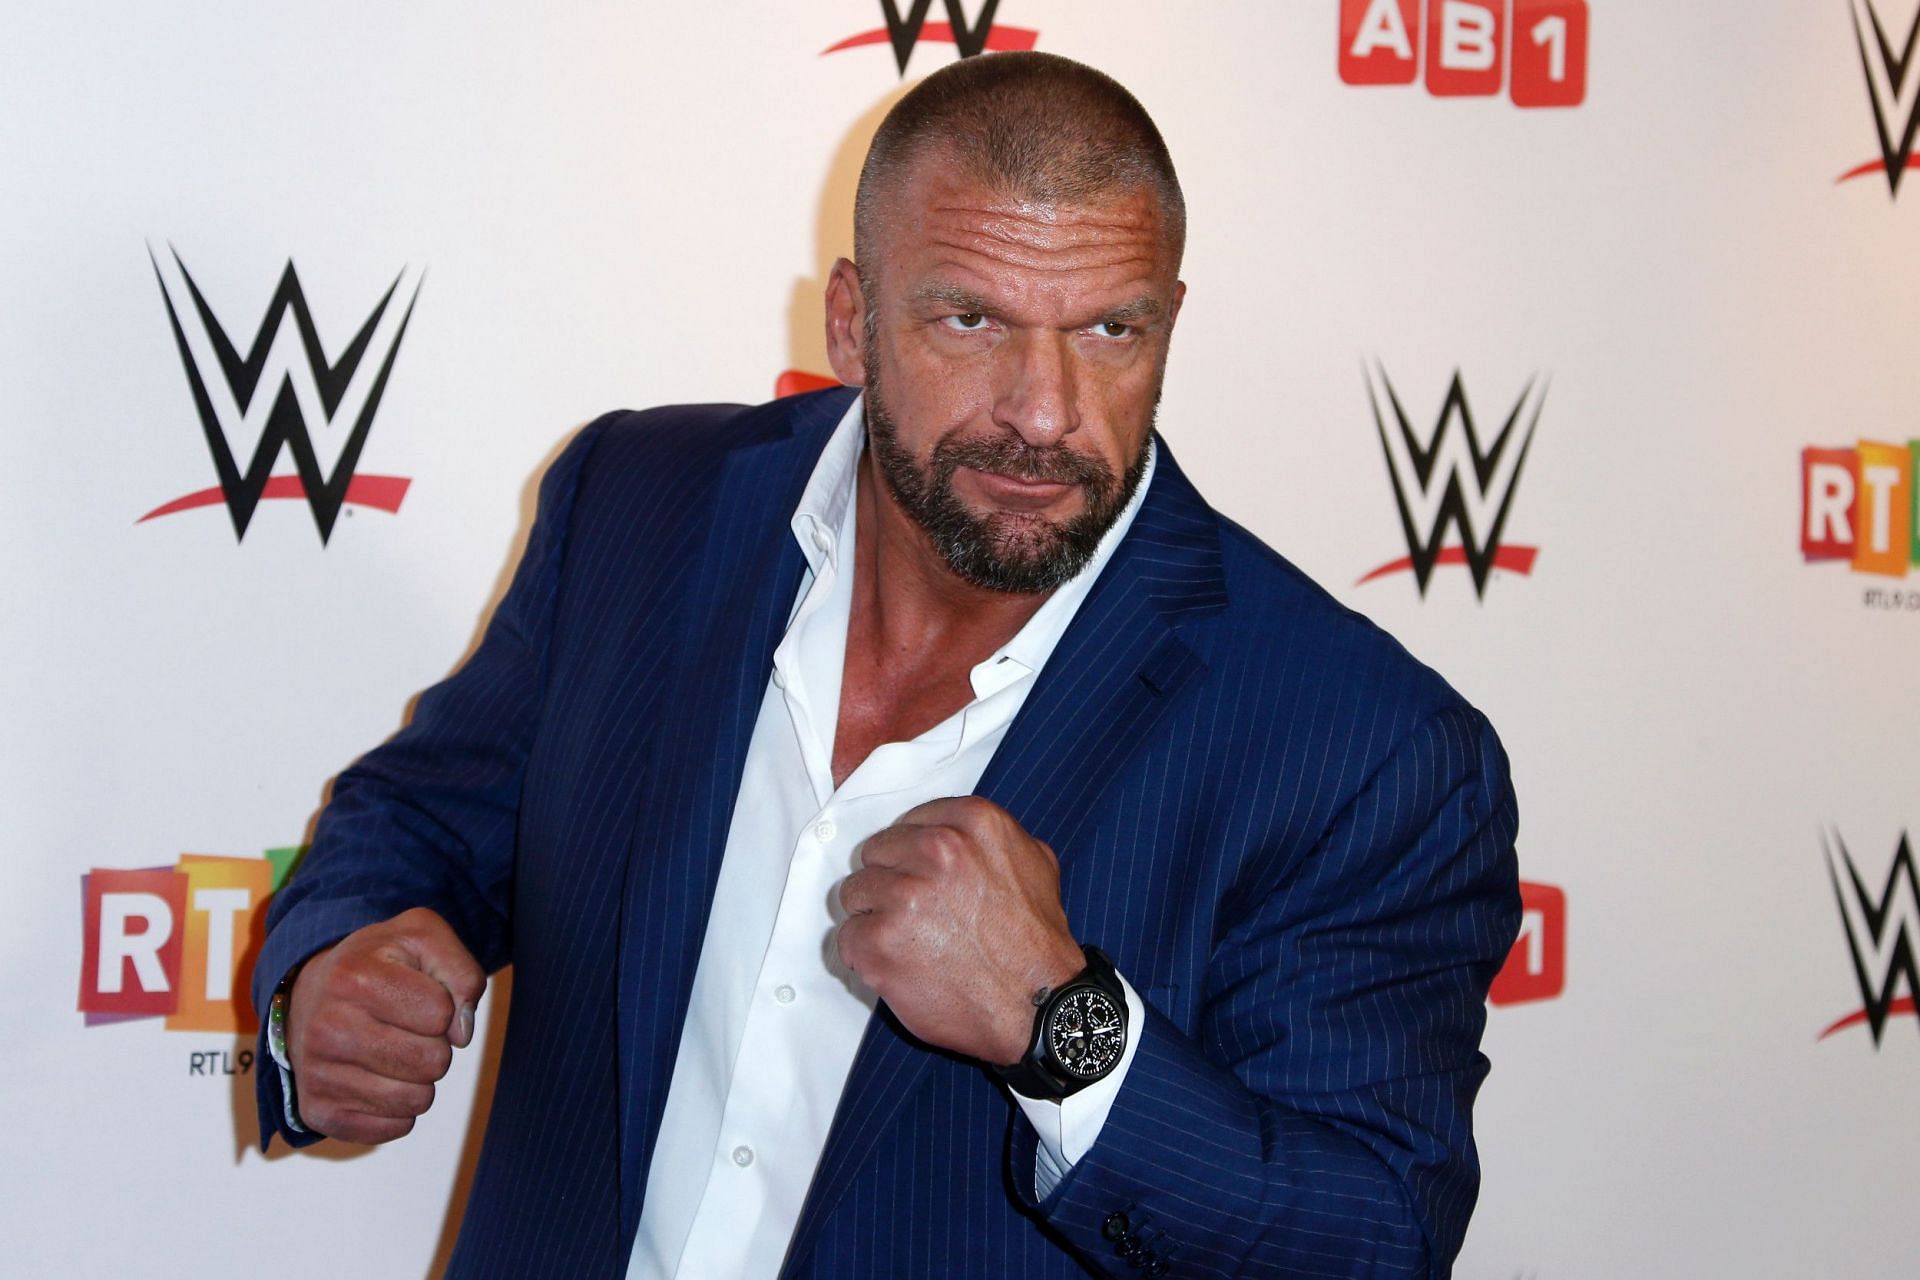 Triple H has been a major force in helping usher in the new generation